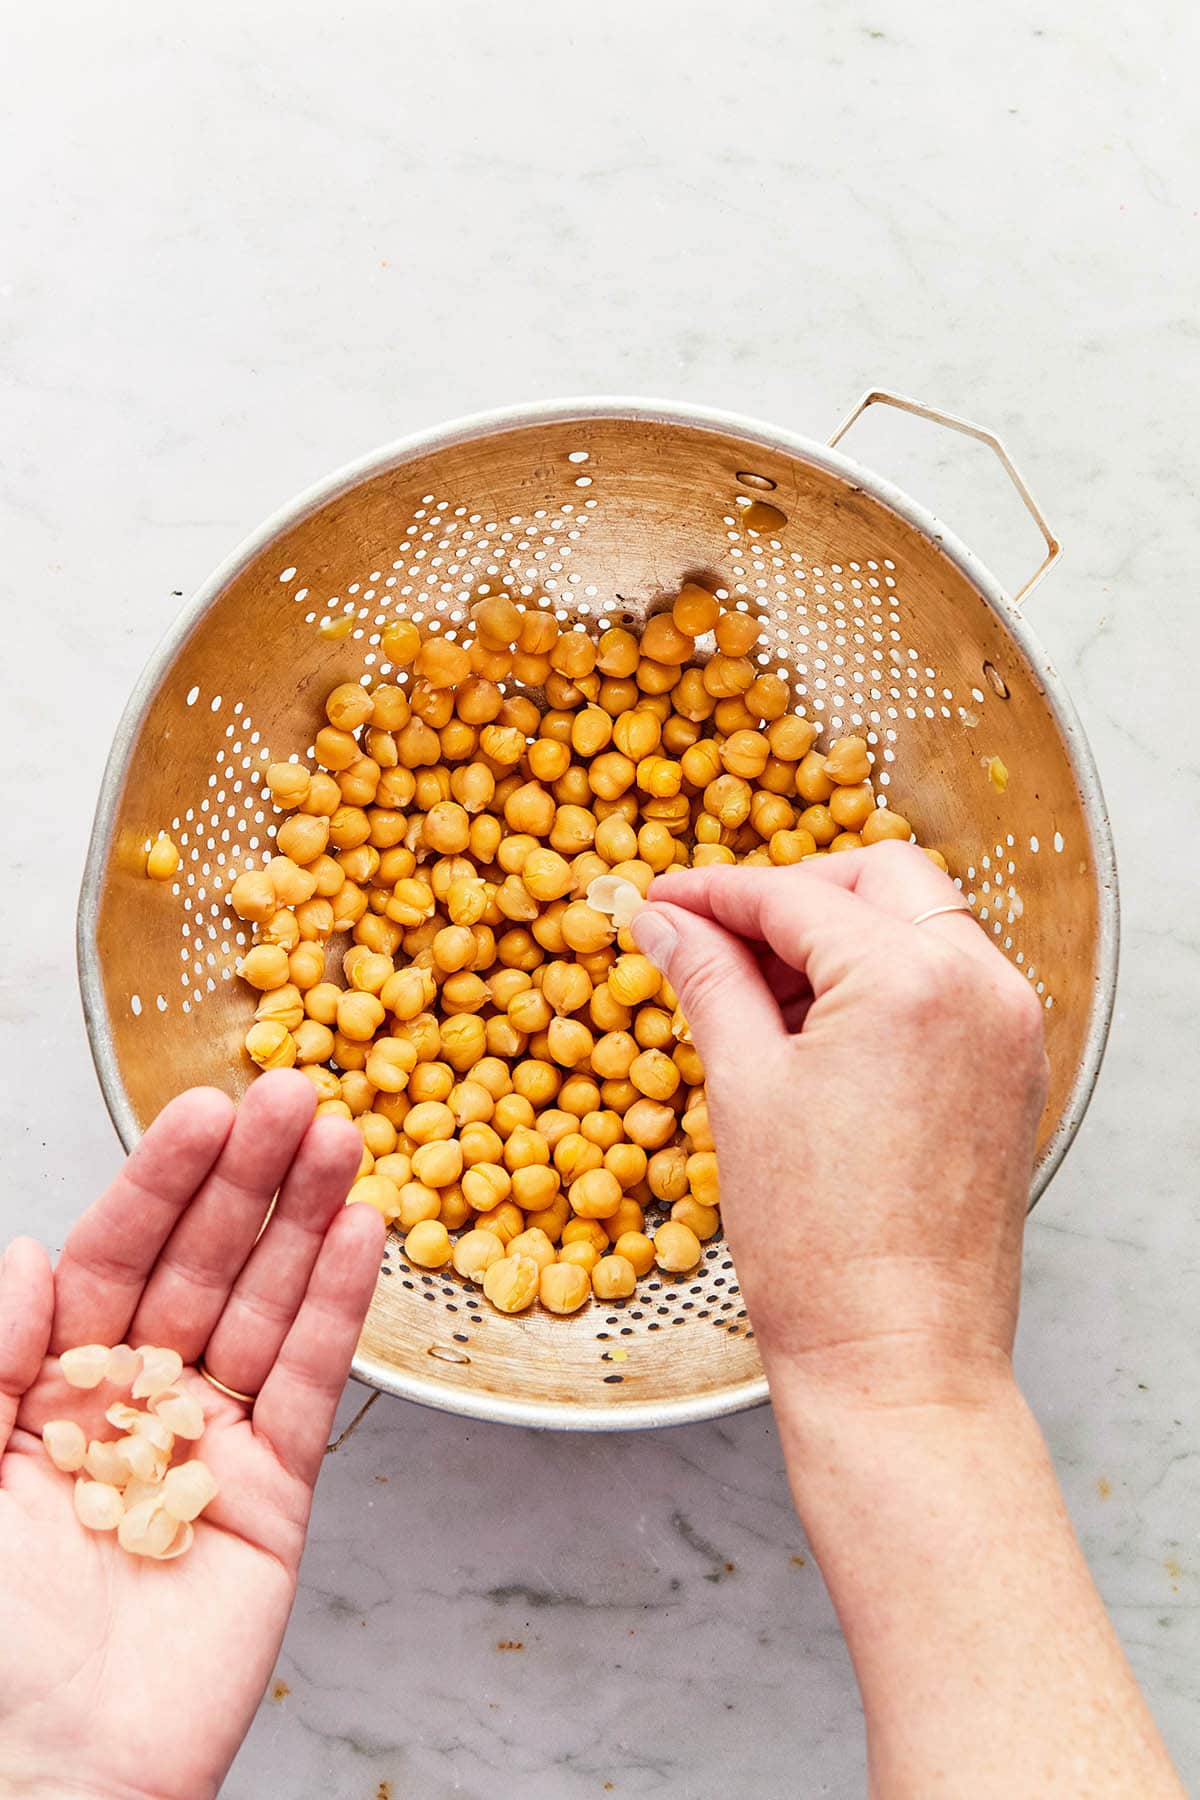 Hands plucking loose shells from rinsed chickpeas in a colander.